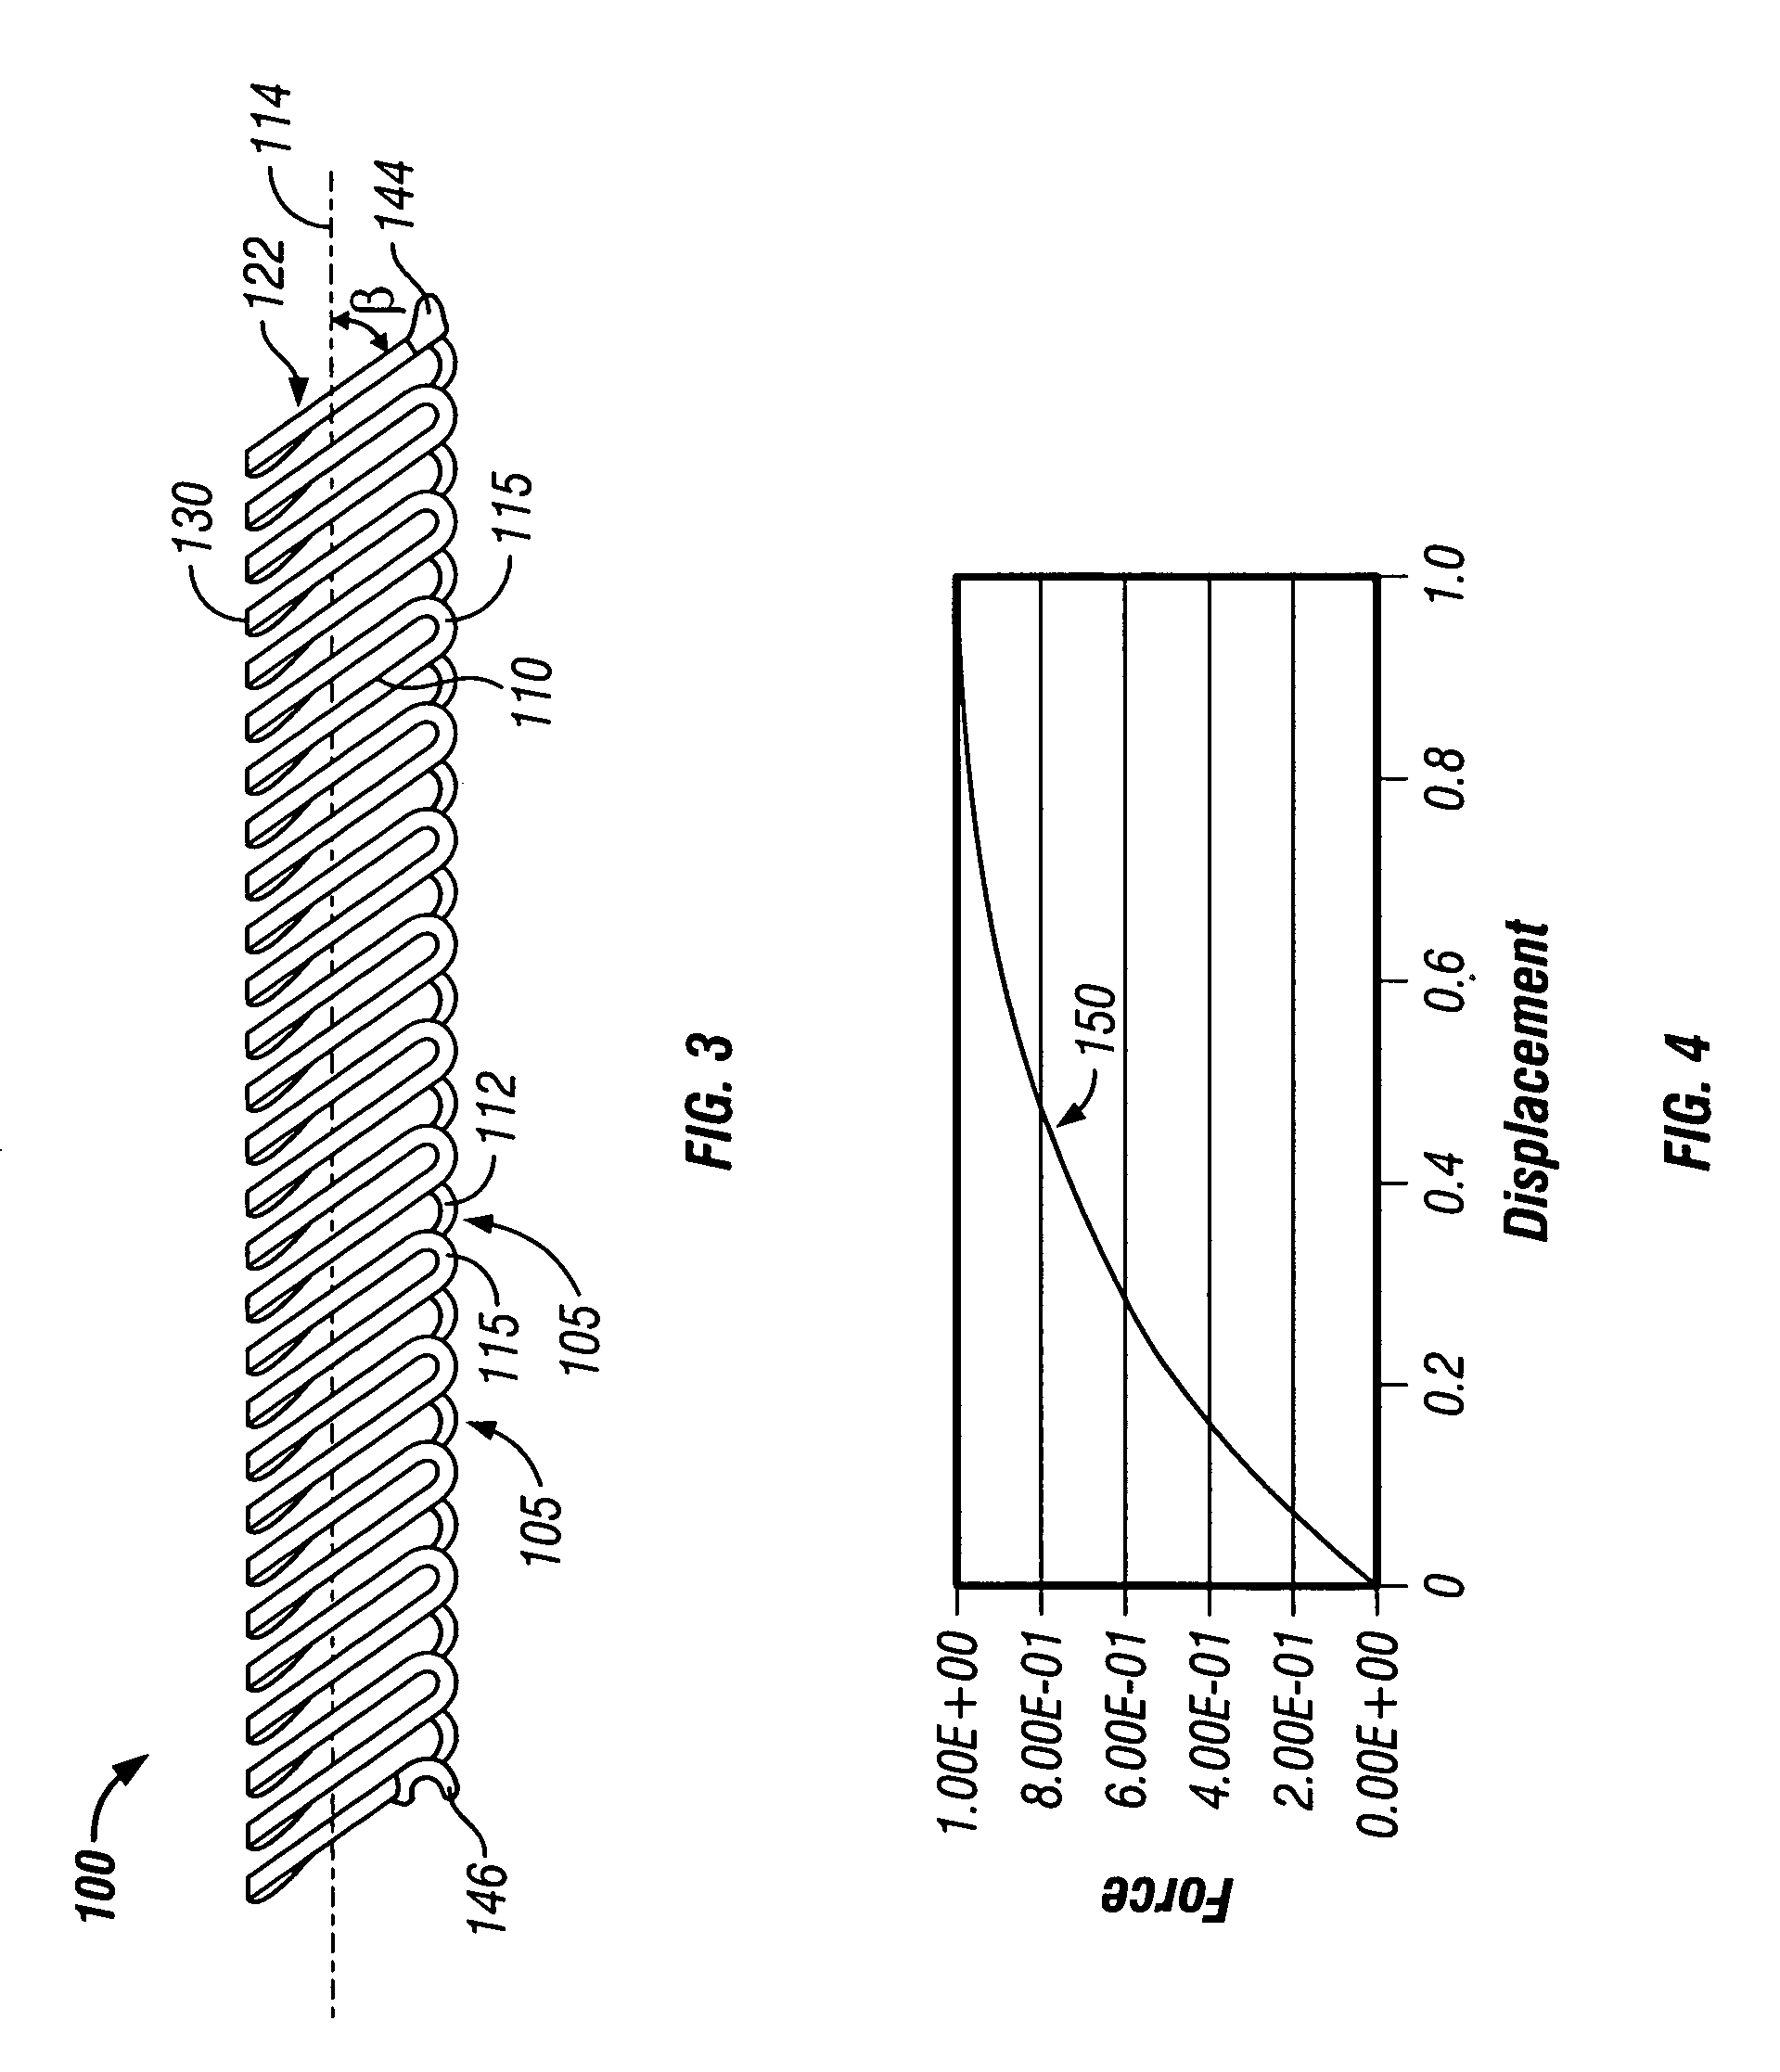 Electrical contact with plural arch-shaped elements